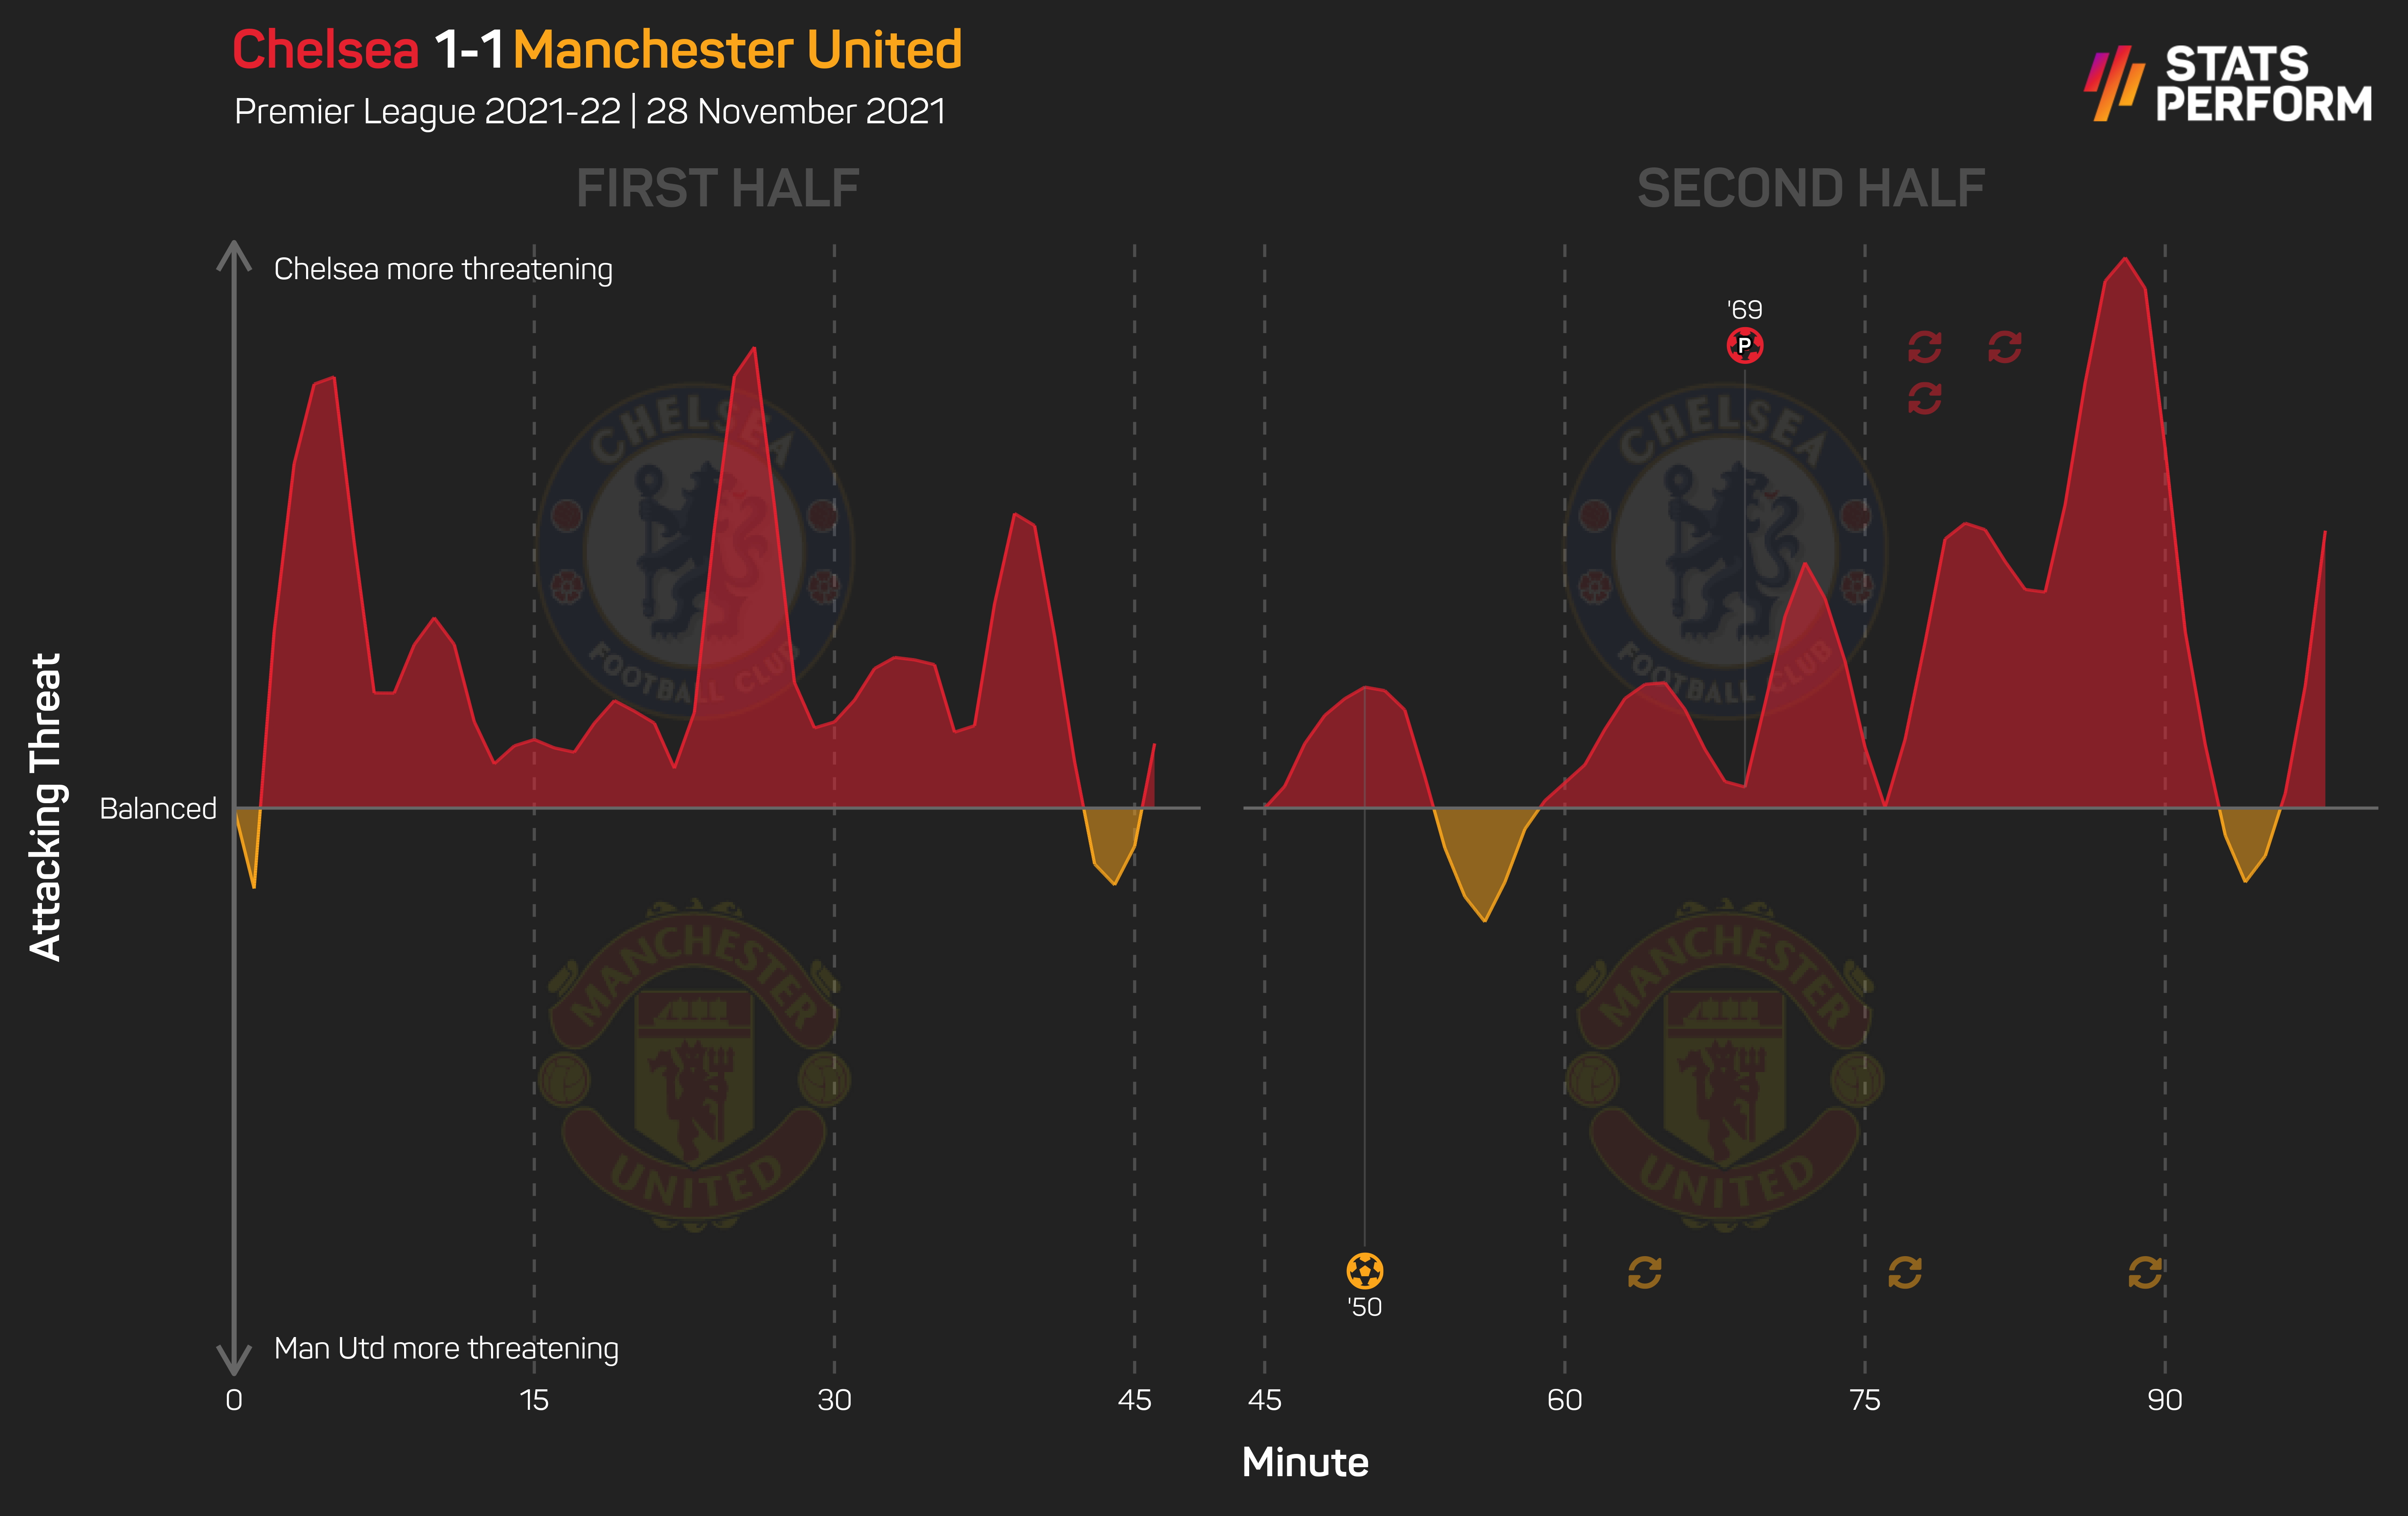 Man Utd were dominated for much of the game